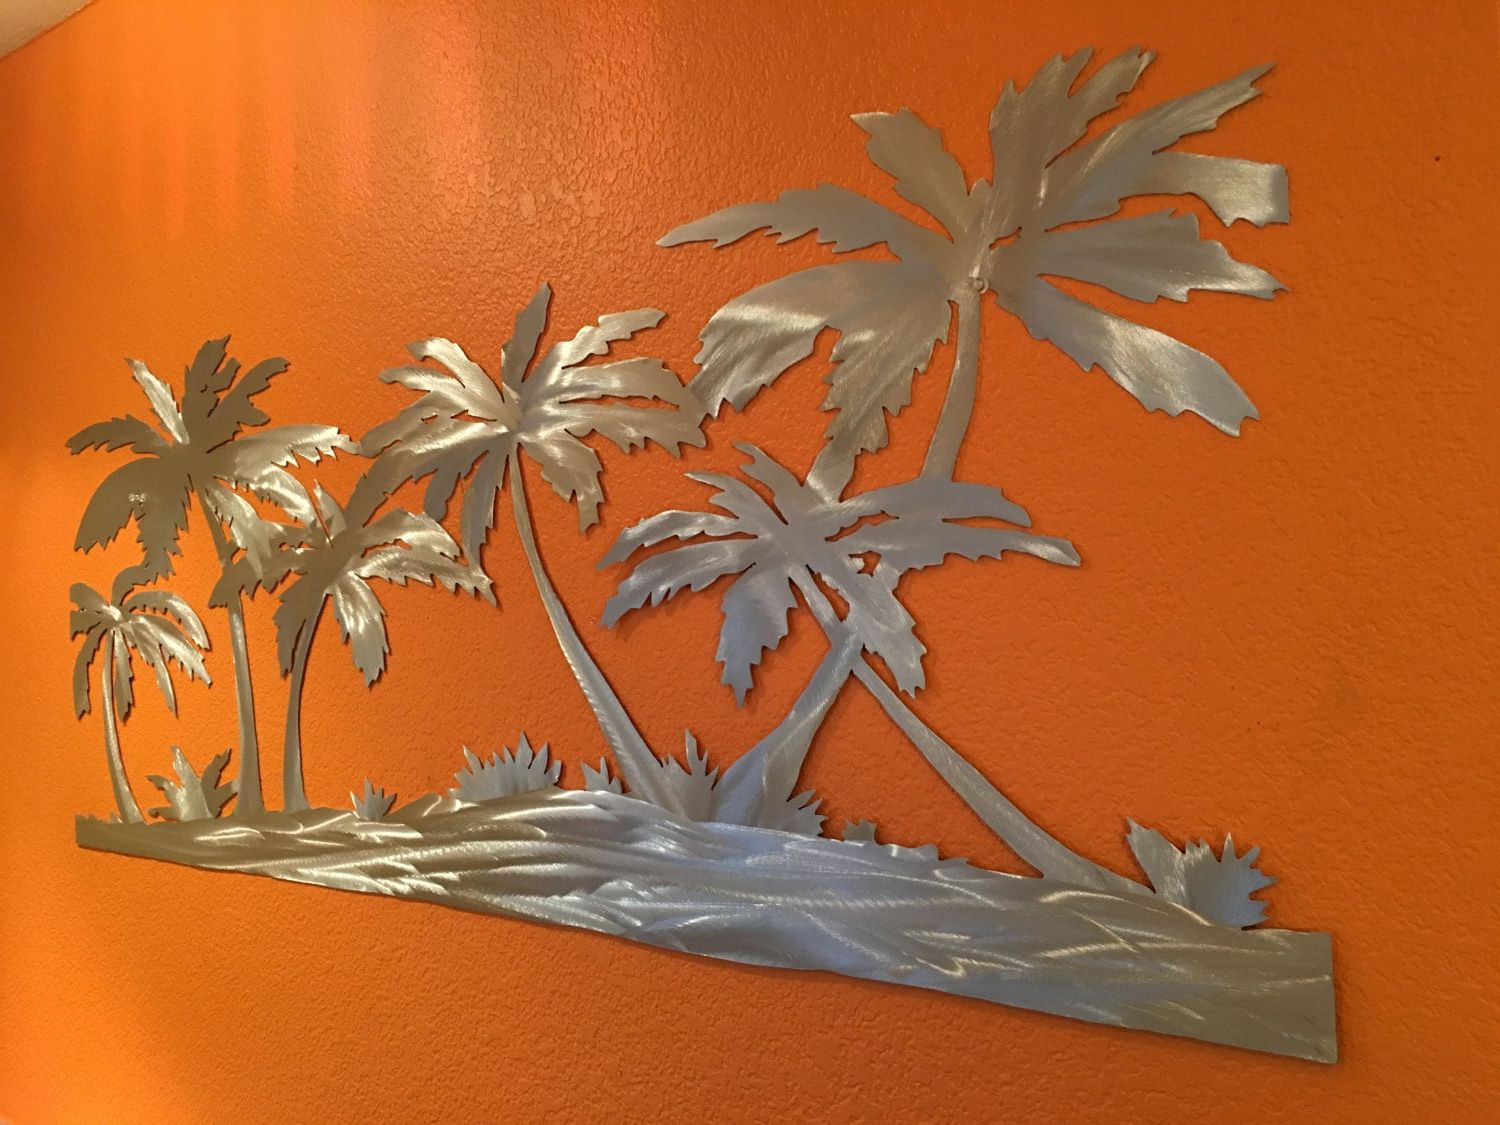 Palm Trees On Beach Metal Wall Artwork Hand Cut Unique Large Aluminum Throughout Well Known Ocean Metal Wall Art (View 4 of 15)